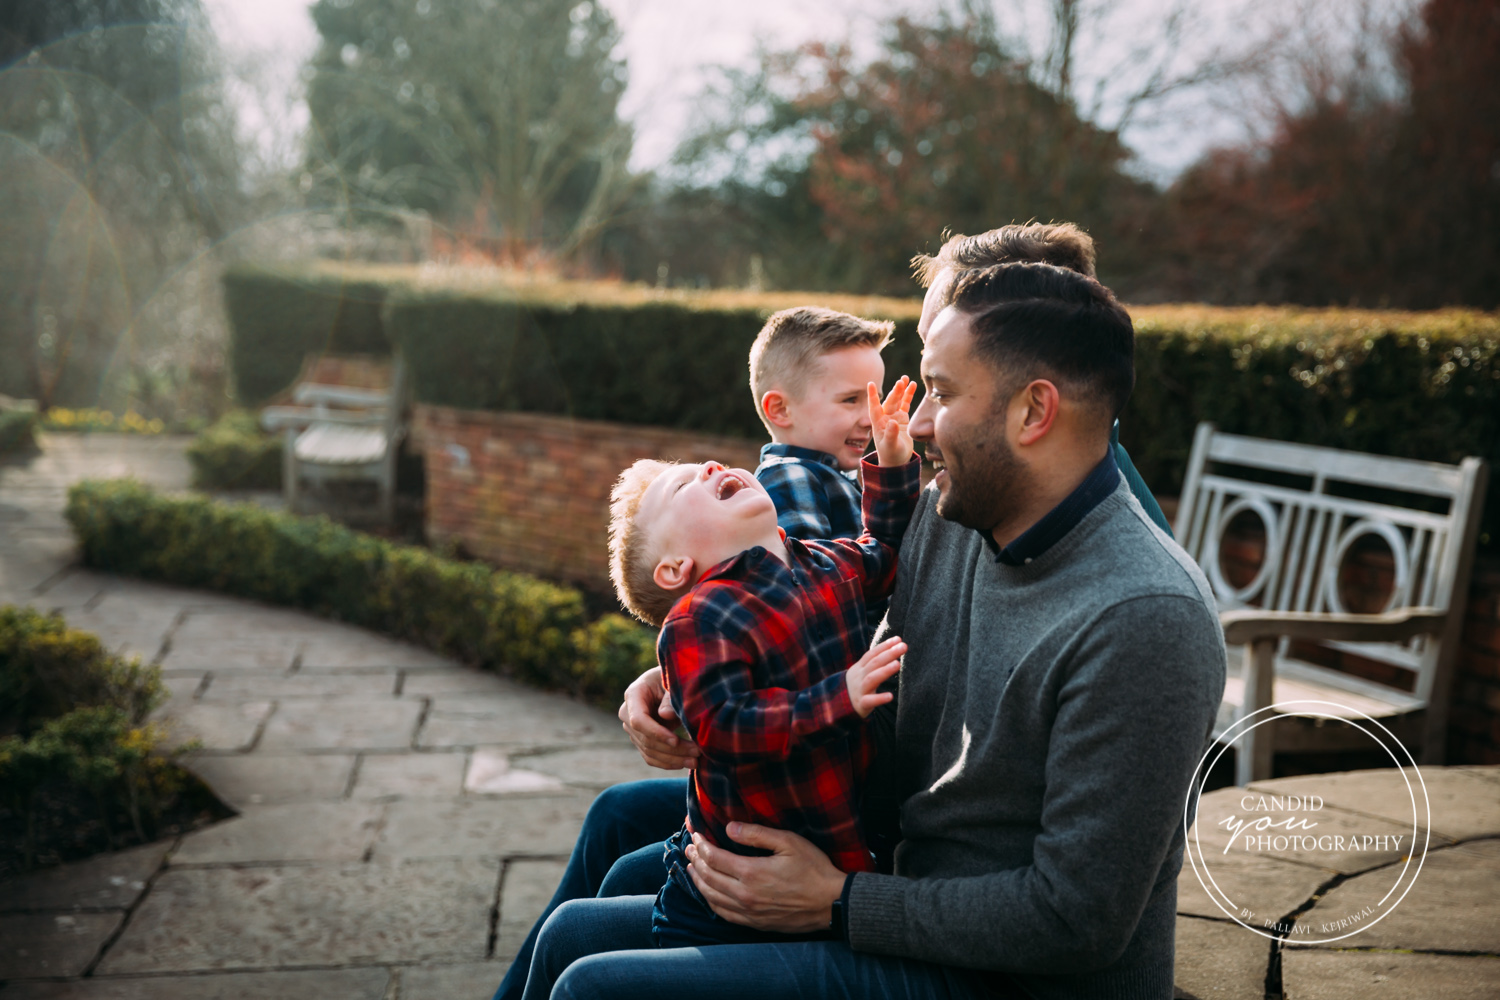 boys giggle uncontrollably while sitting on dad's laps and against setting sun